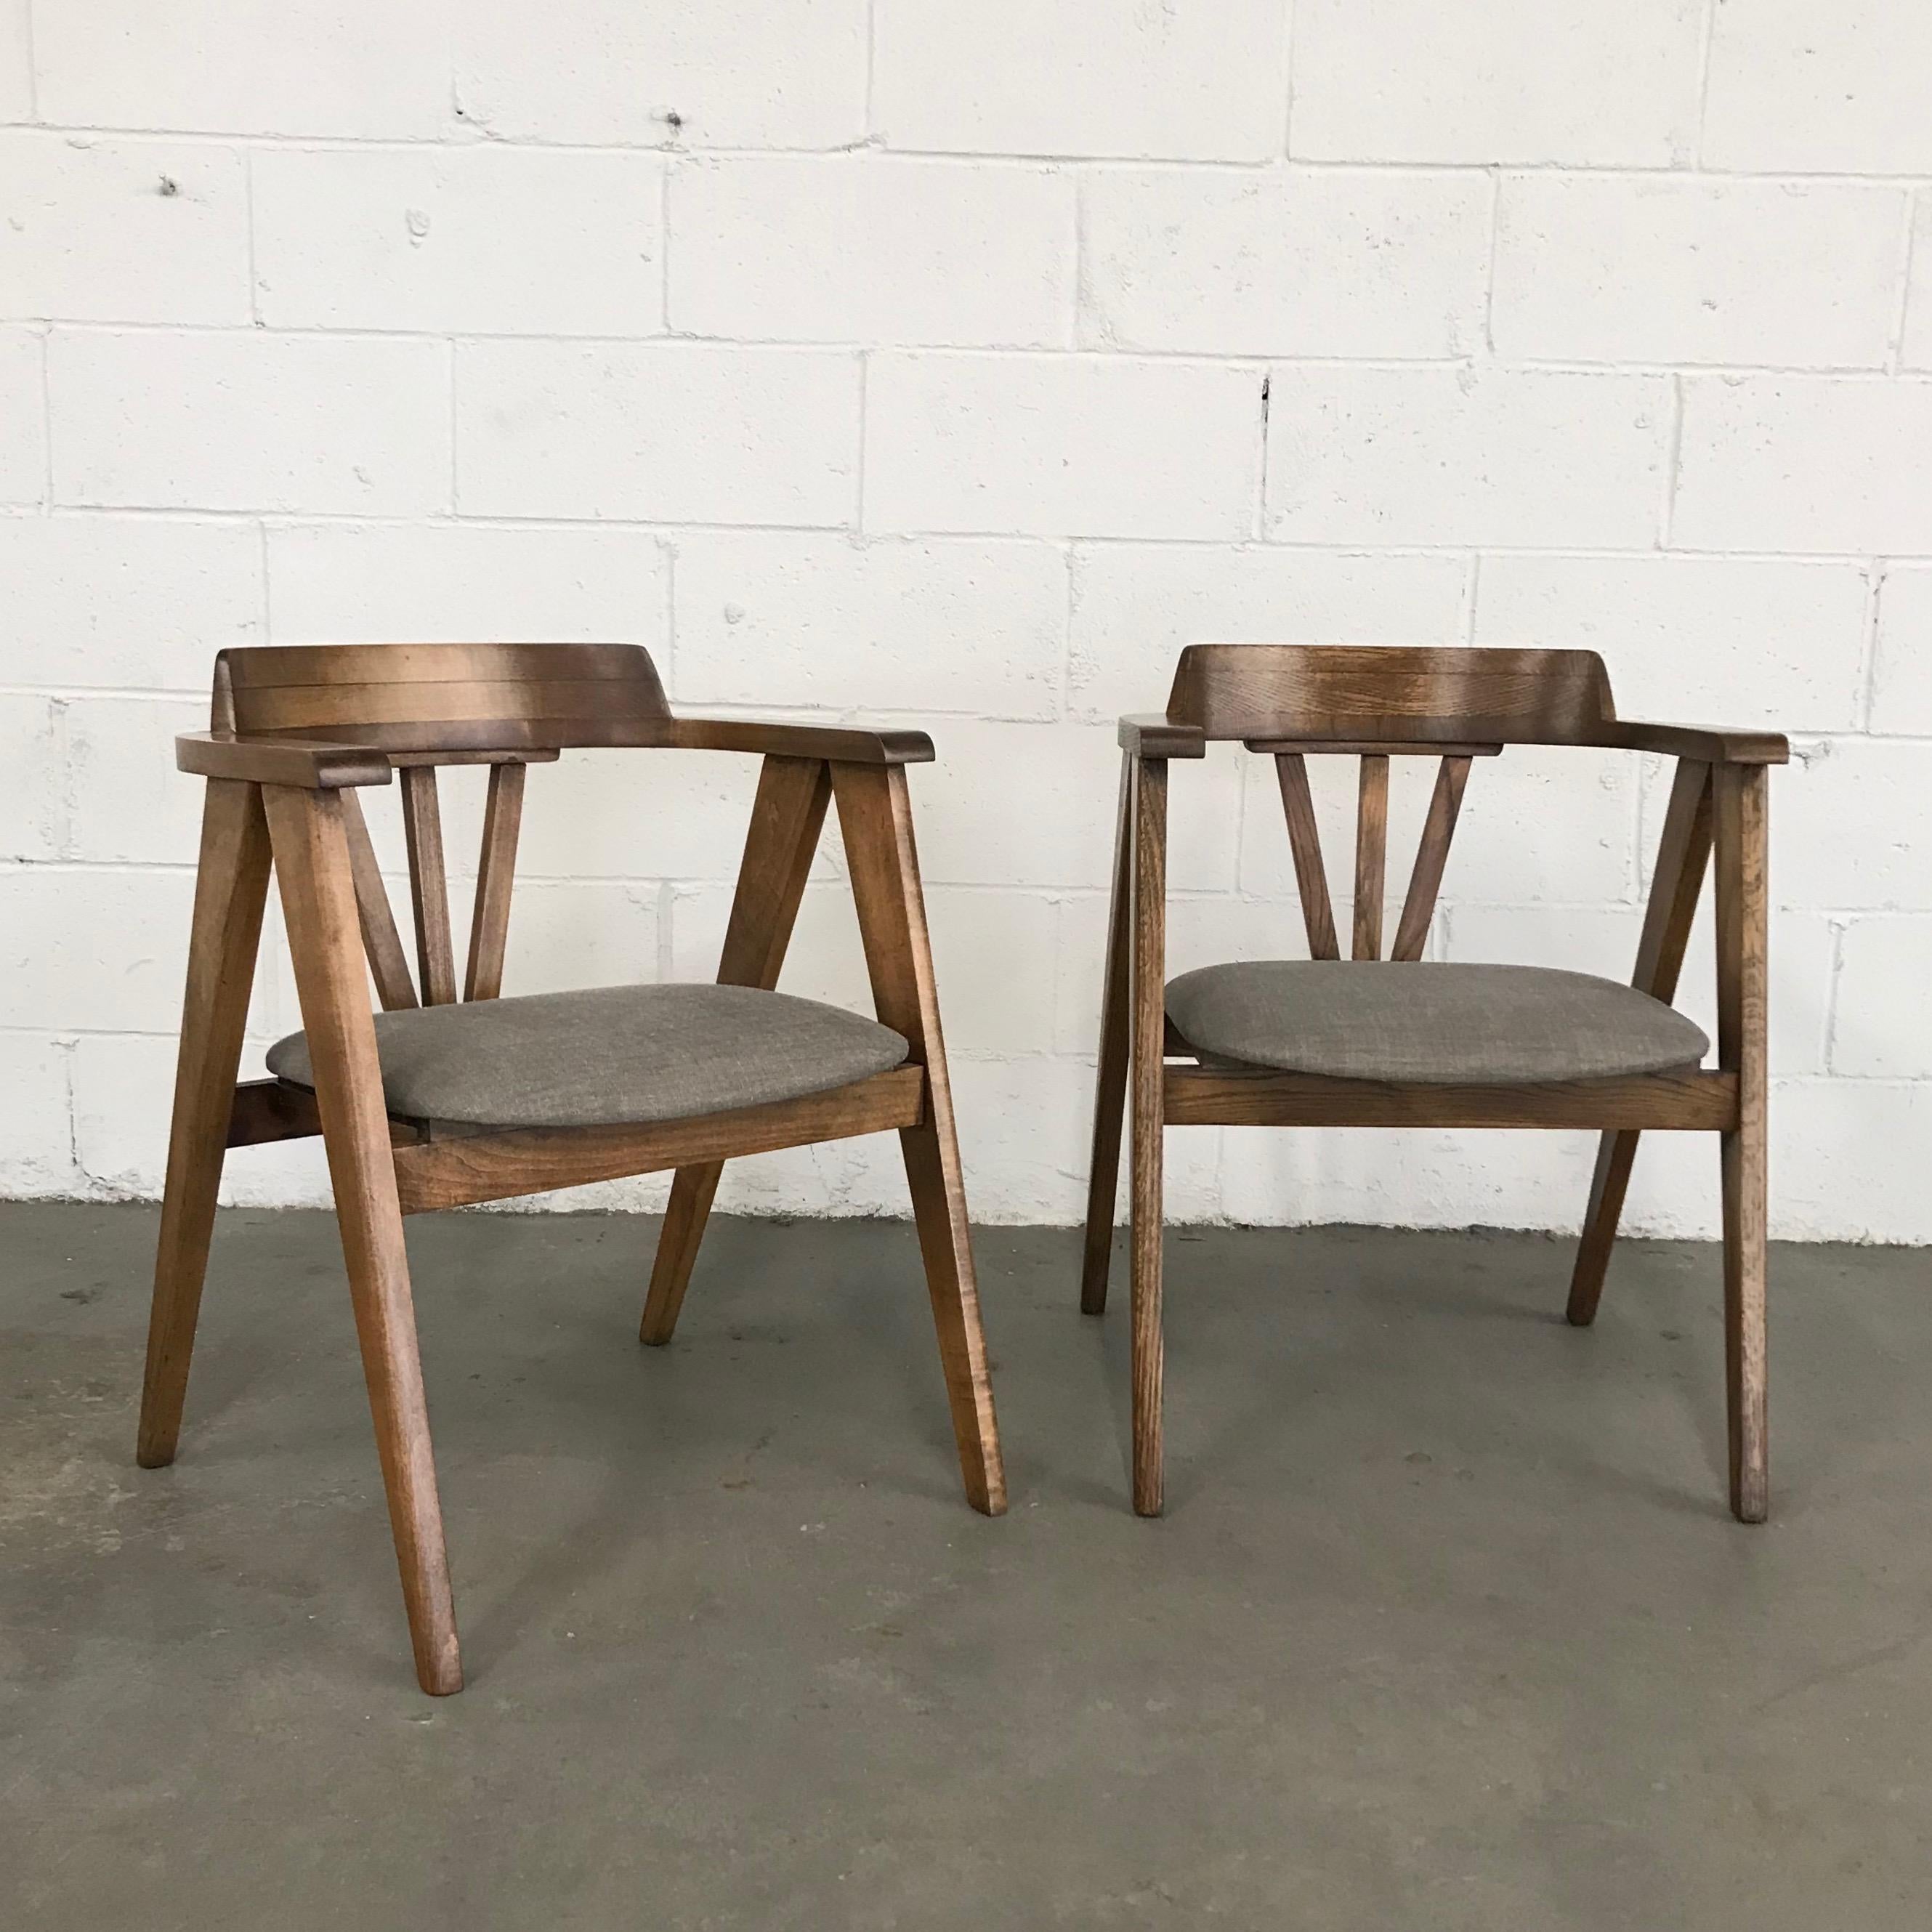 American Pair of Mid-Century Modern Oak Compass Chairs